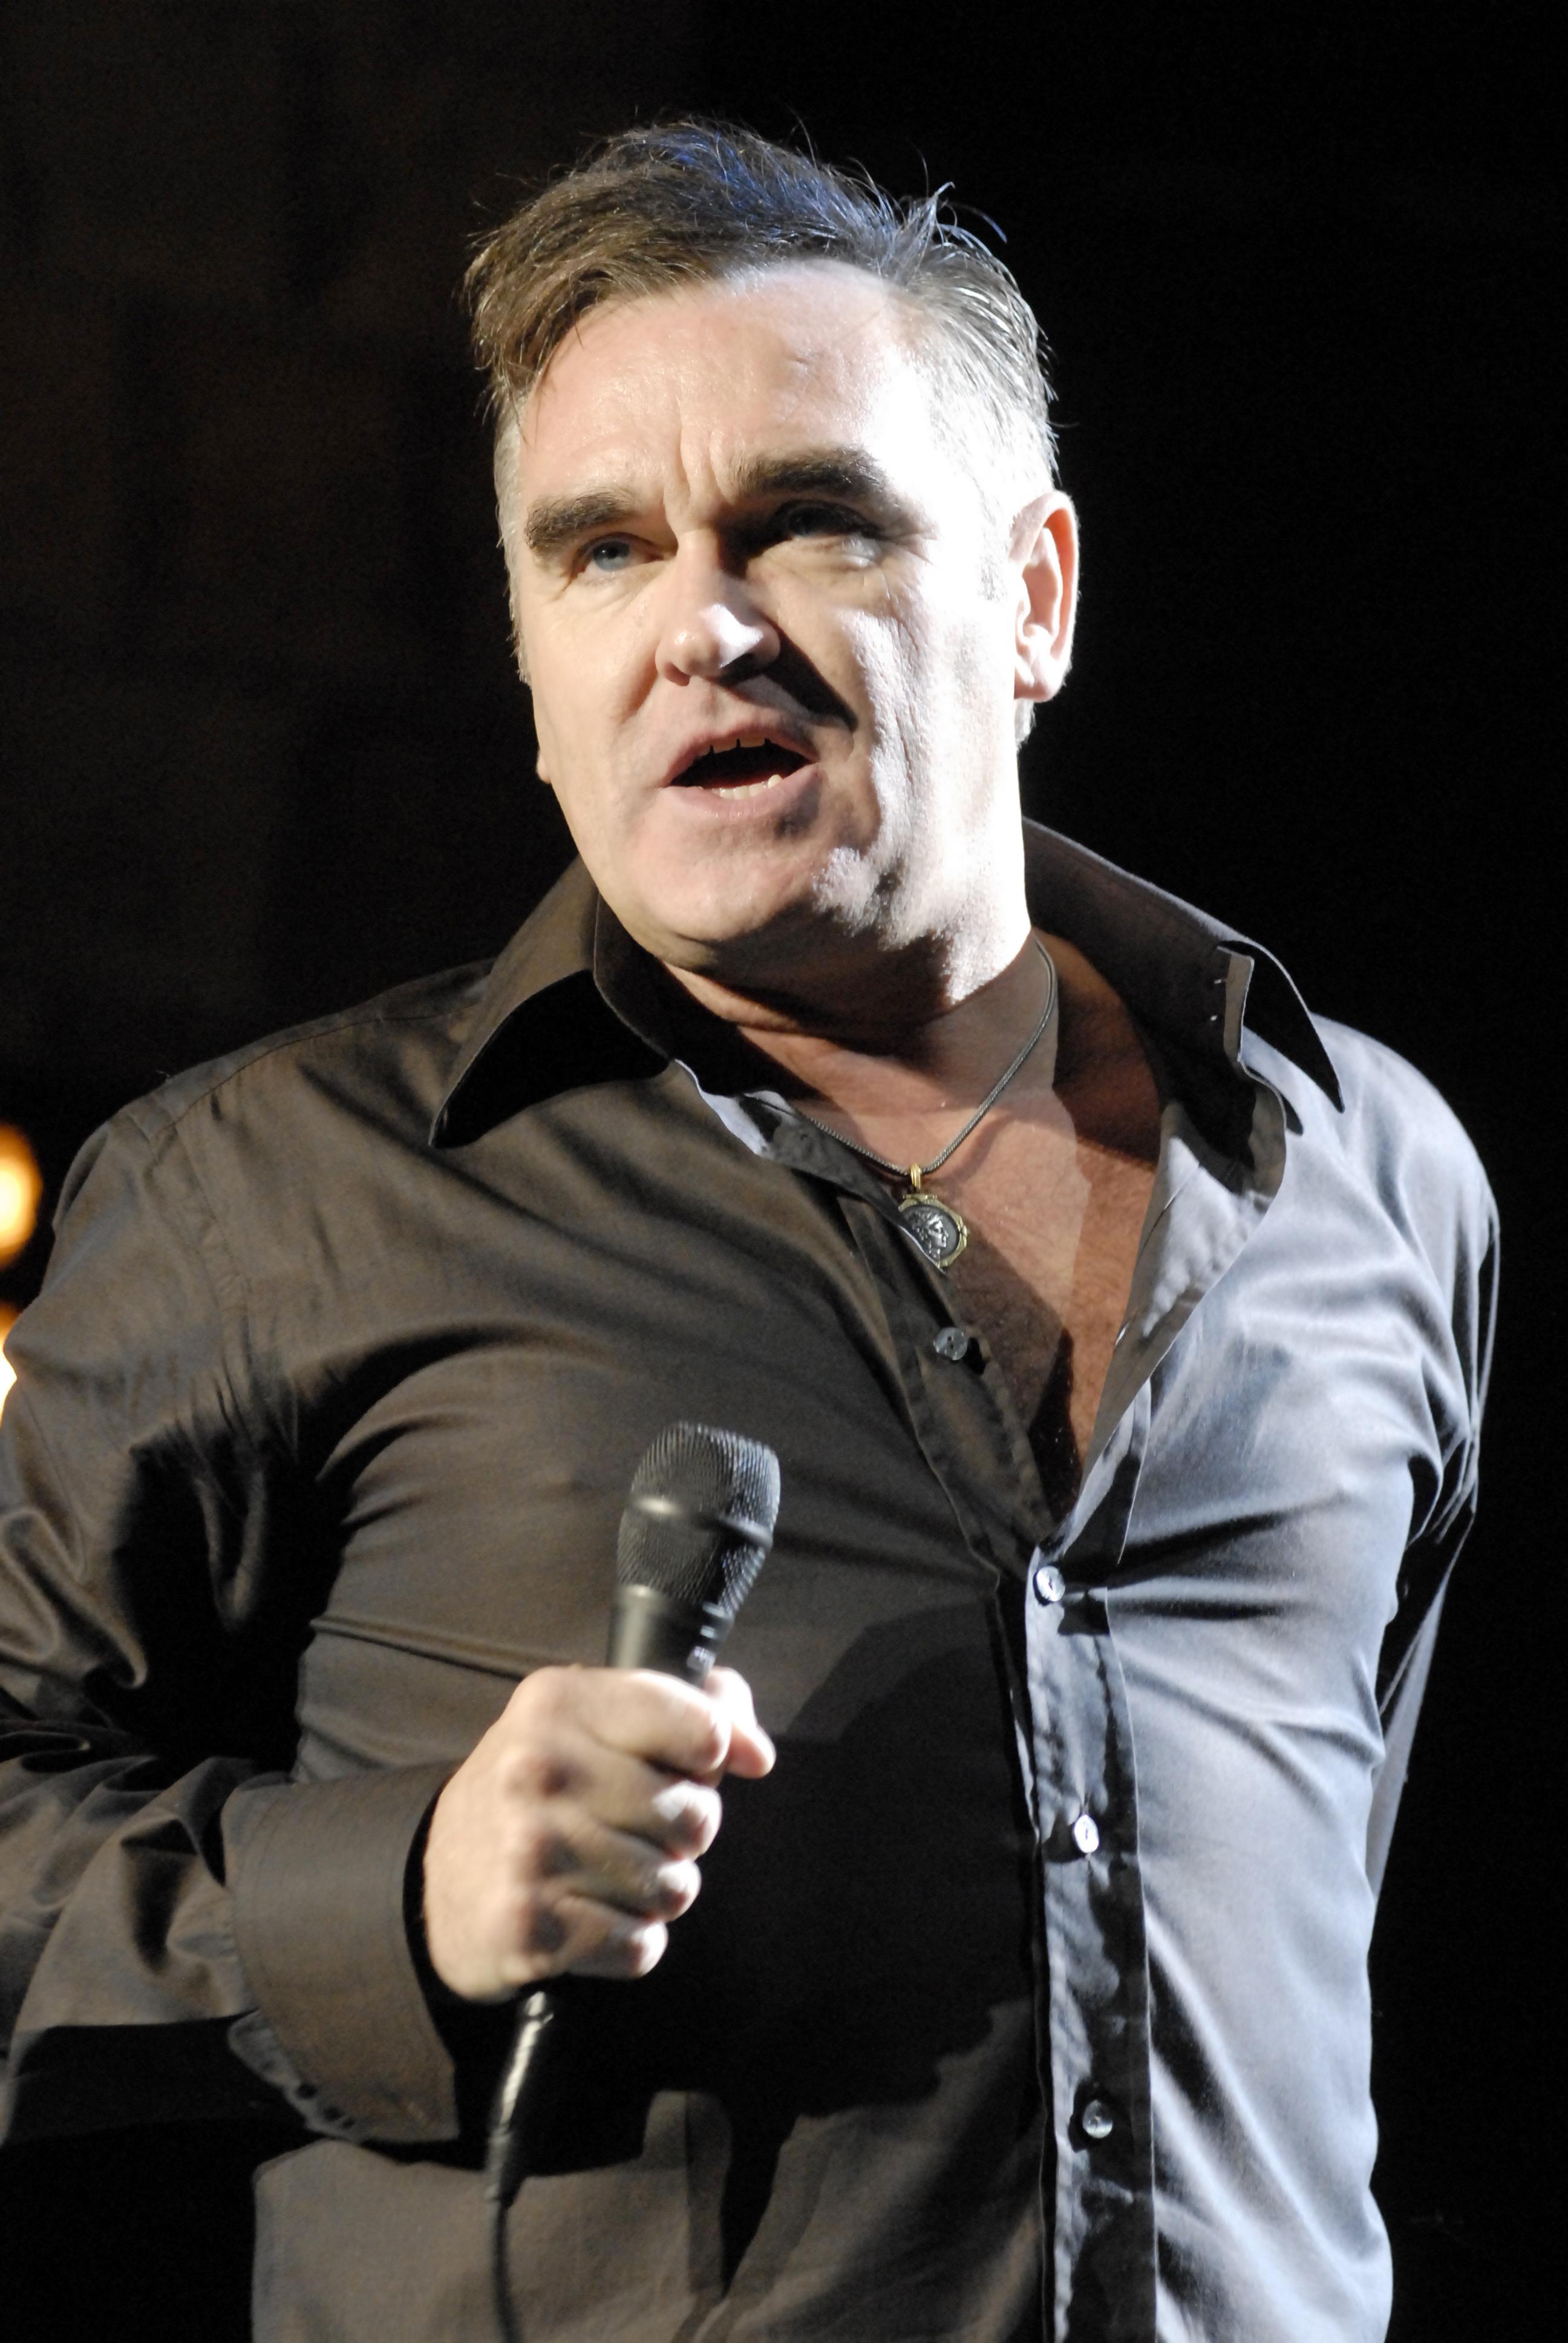 Morrissey reschedules canceled UK concerts… then cancels another concert